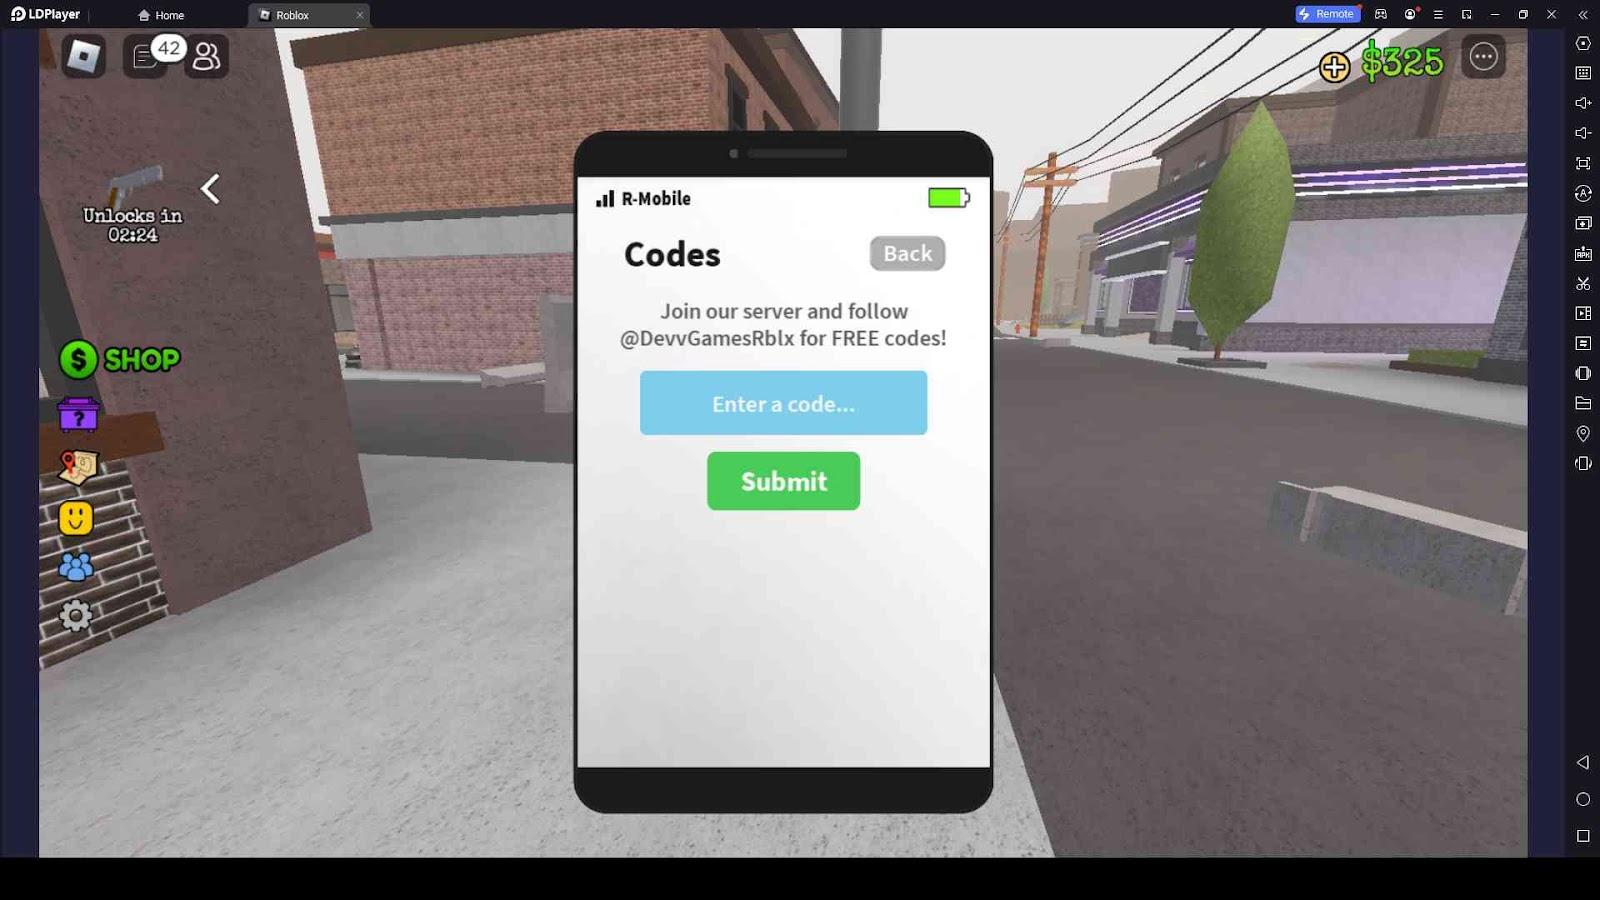 ALL NEW *FREE CASH* UPDATE CODES in OHIO CODES! (Roblox Ohio Codes) 